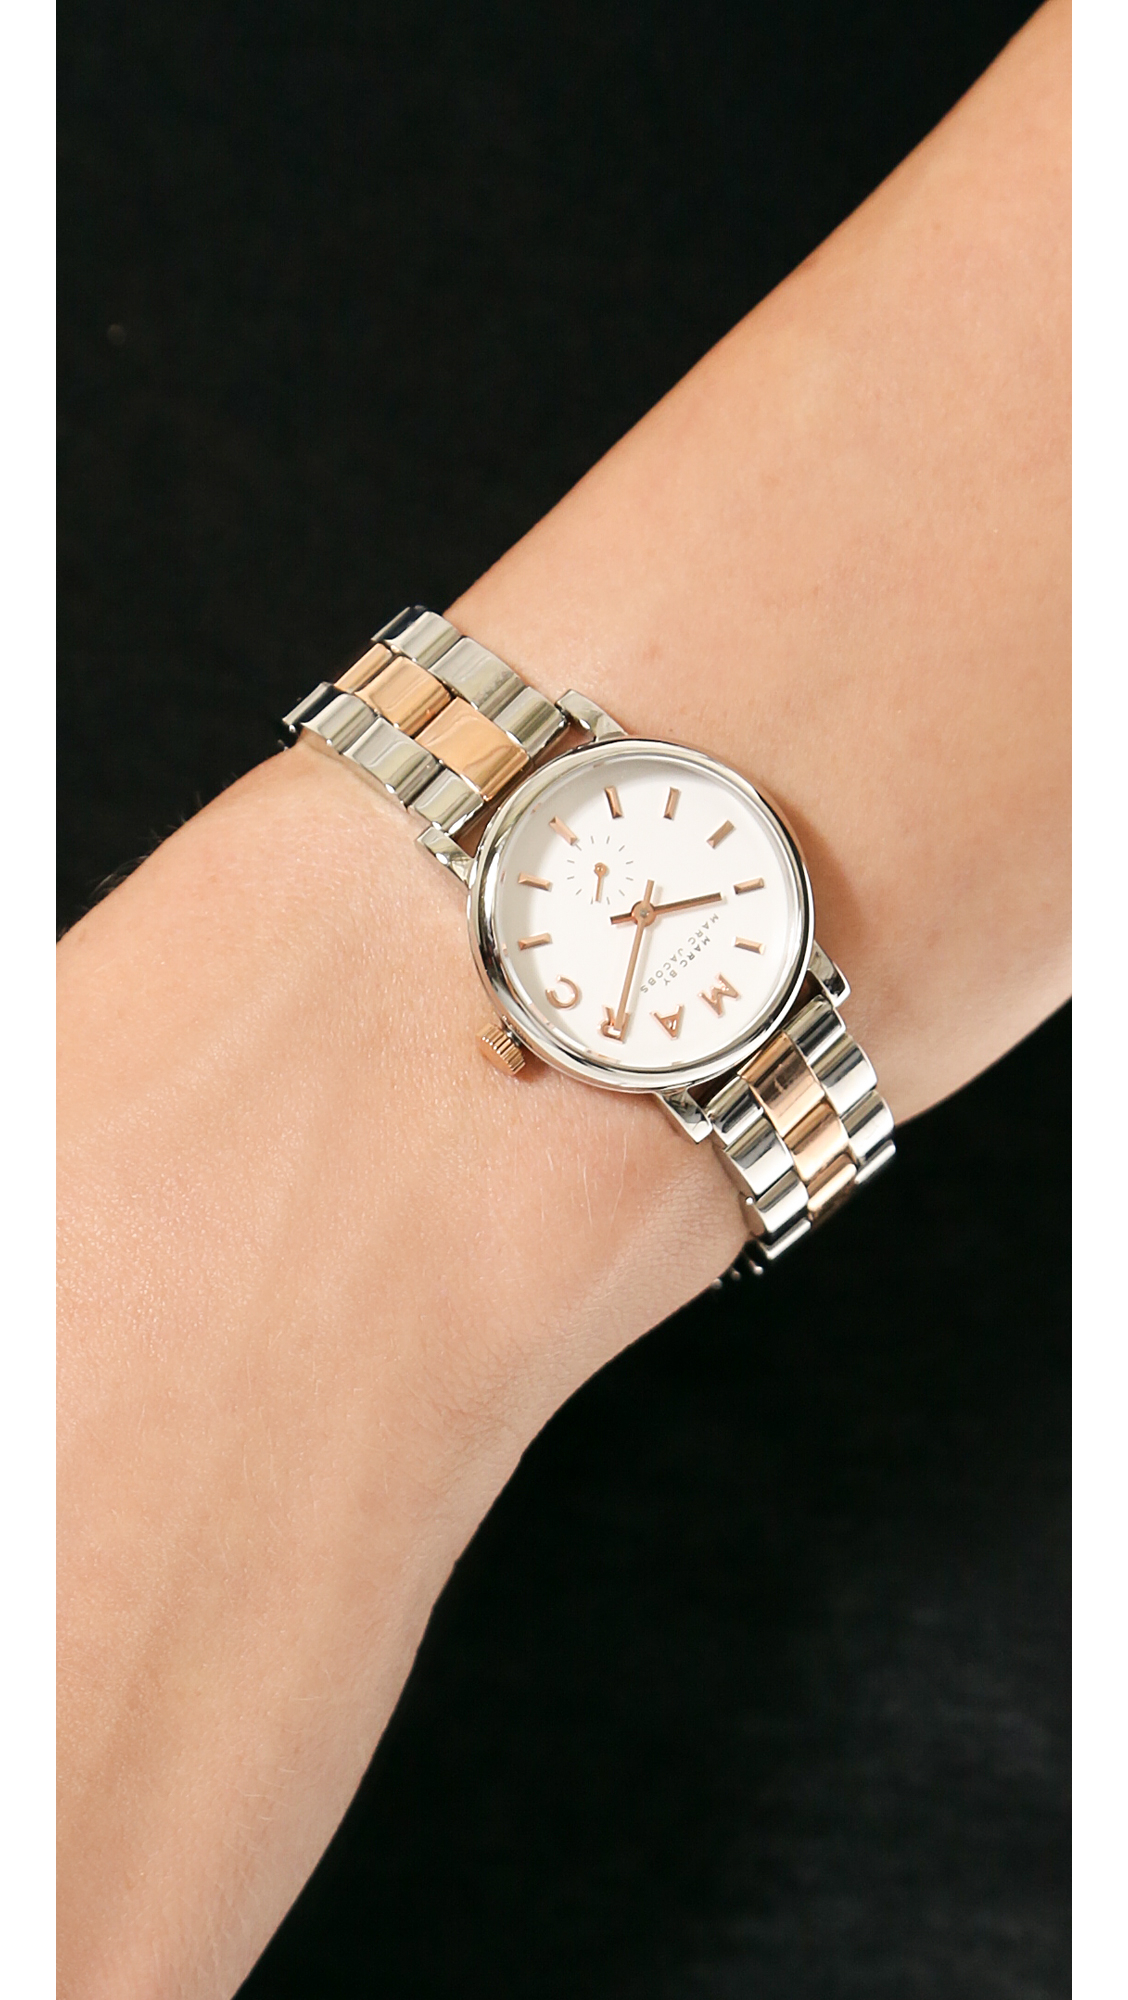 Lyst - Marc By Marc Jacobs Baker Watch - Two Tone Silver/Rose Gold in